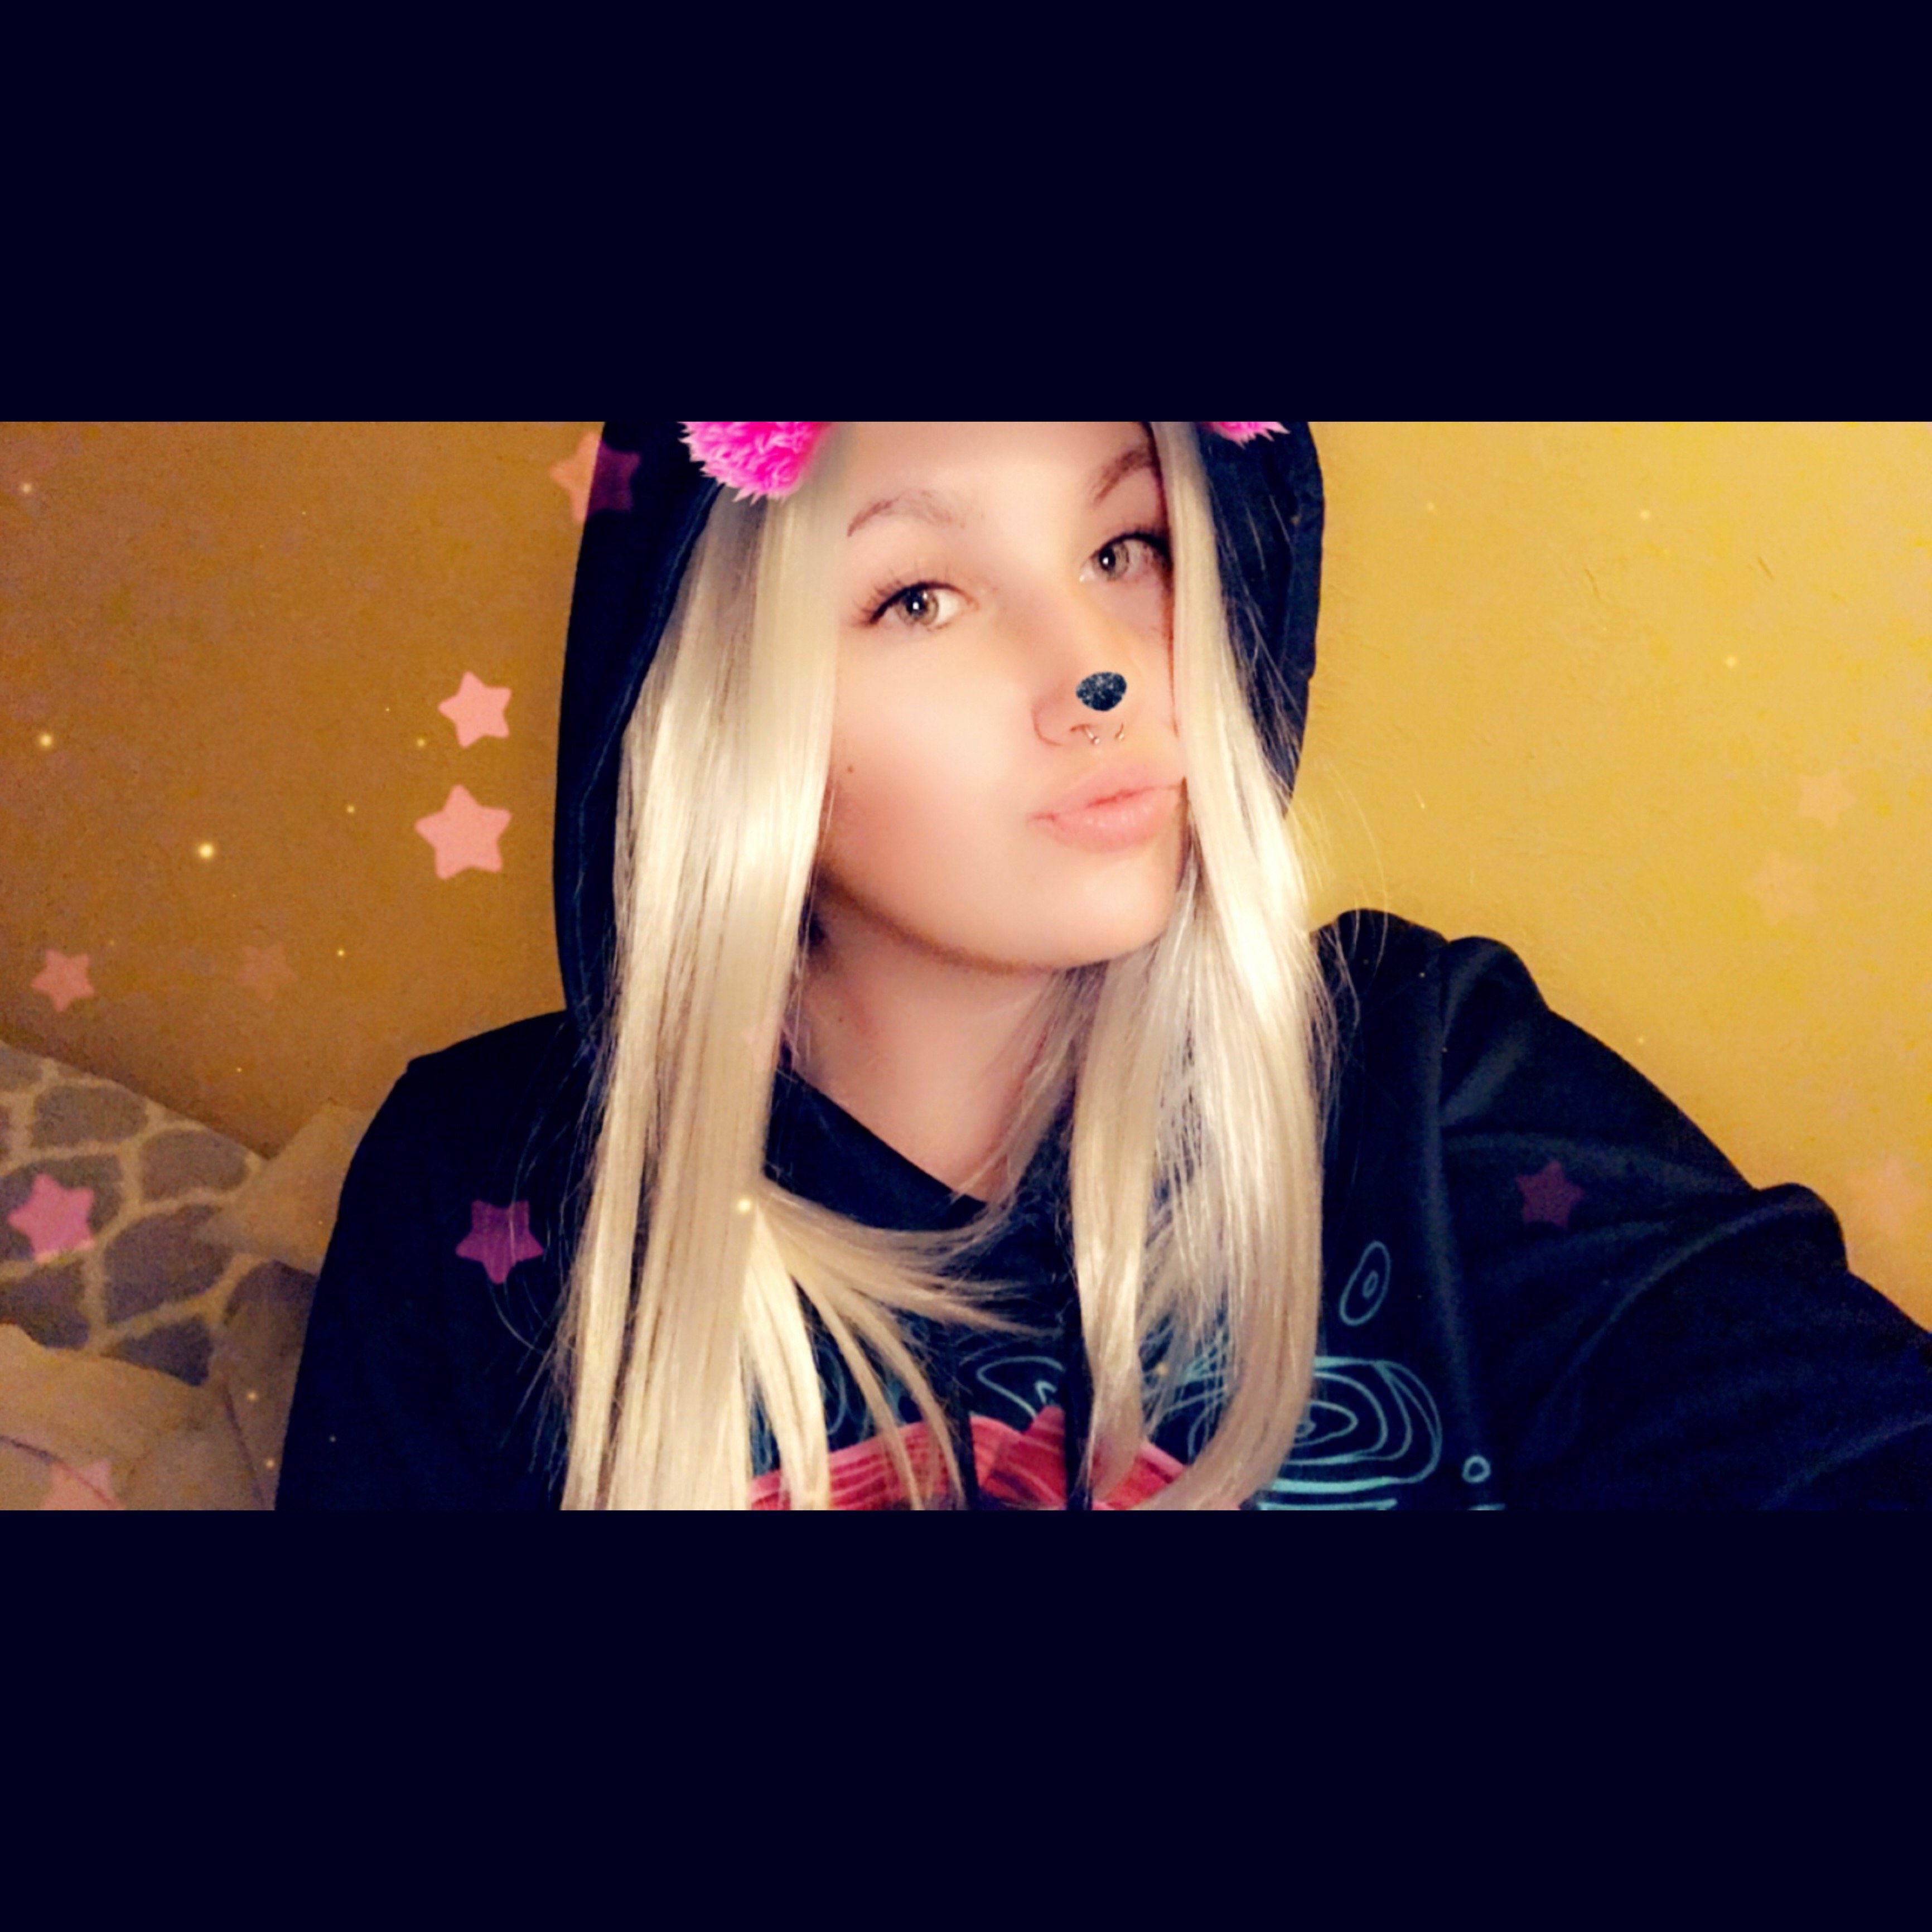 Im Gabi Im still new with make up looks and cosplay as well I would love advice and support on tips and anything your willing to share.